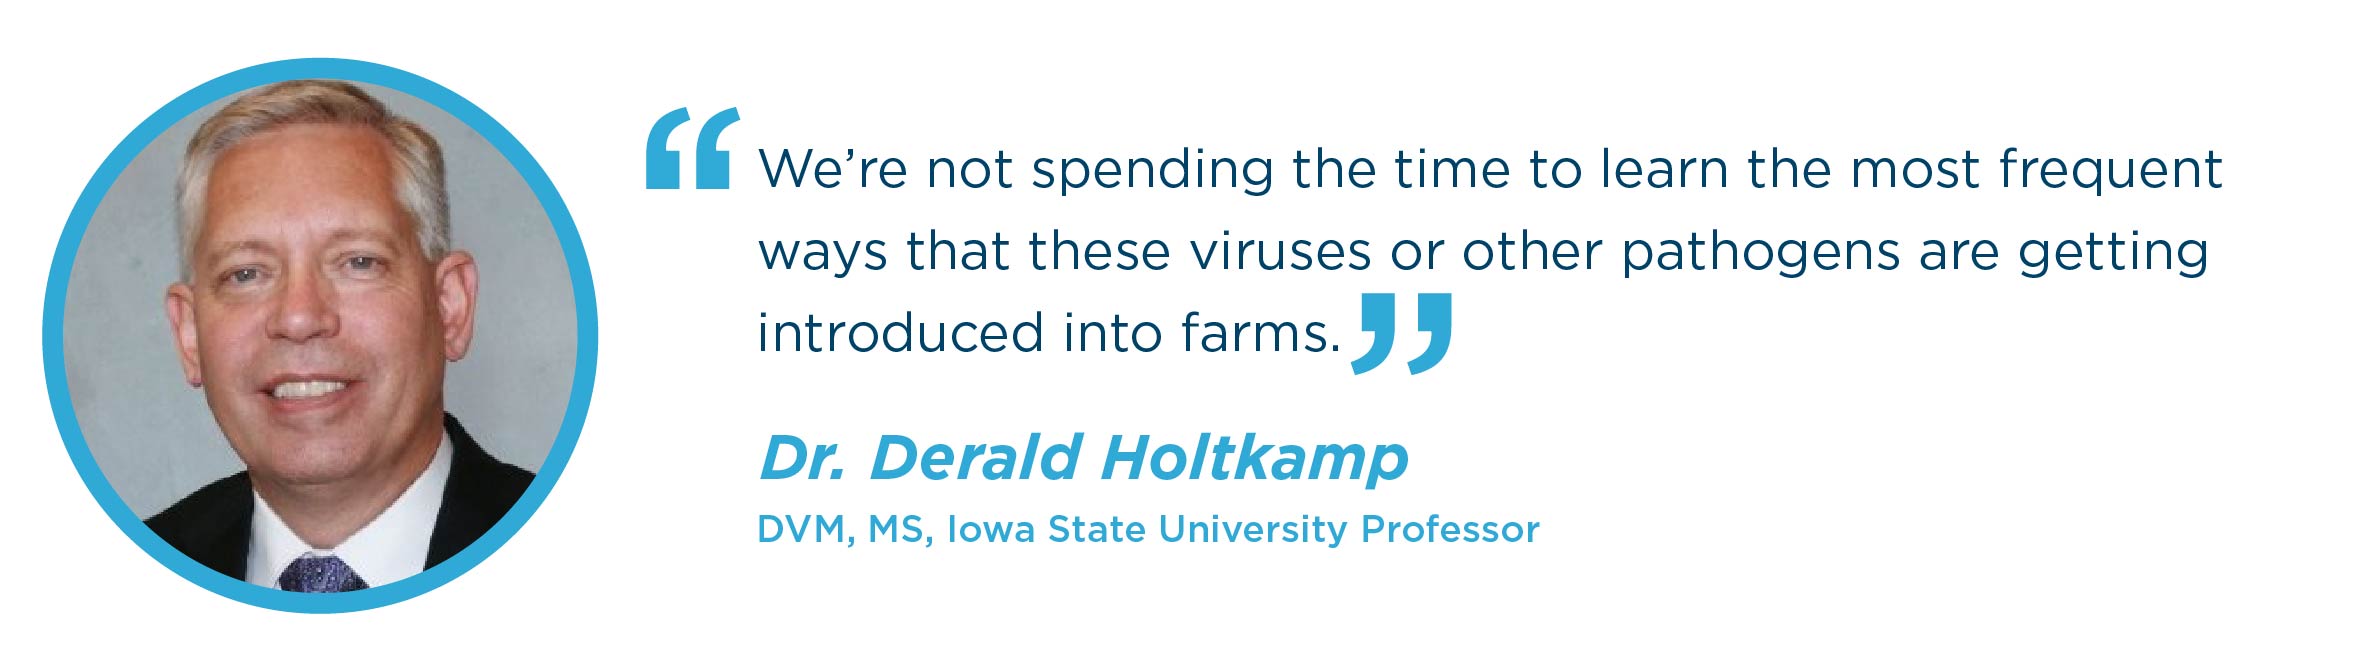 We’re not spending the time to learn the most frequent ways that these viruses or other pathogens are getting introduced into farms. Dr. Derald Holtkamp DVM, MS, Iowa State University Professor